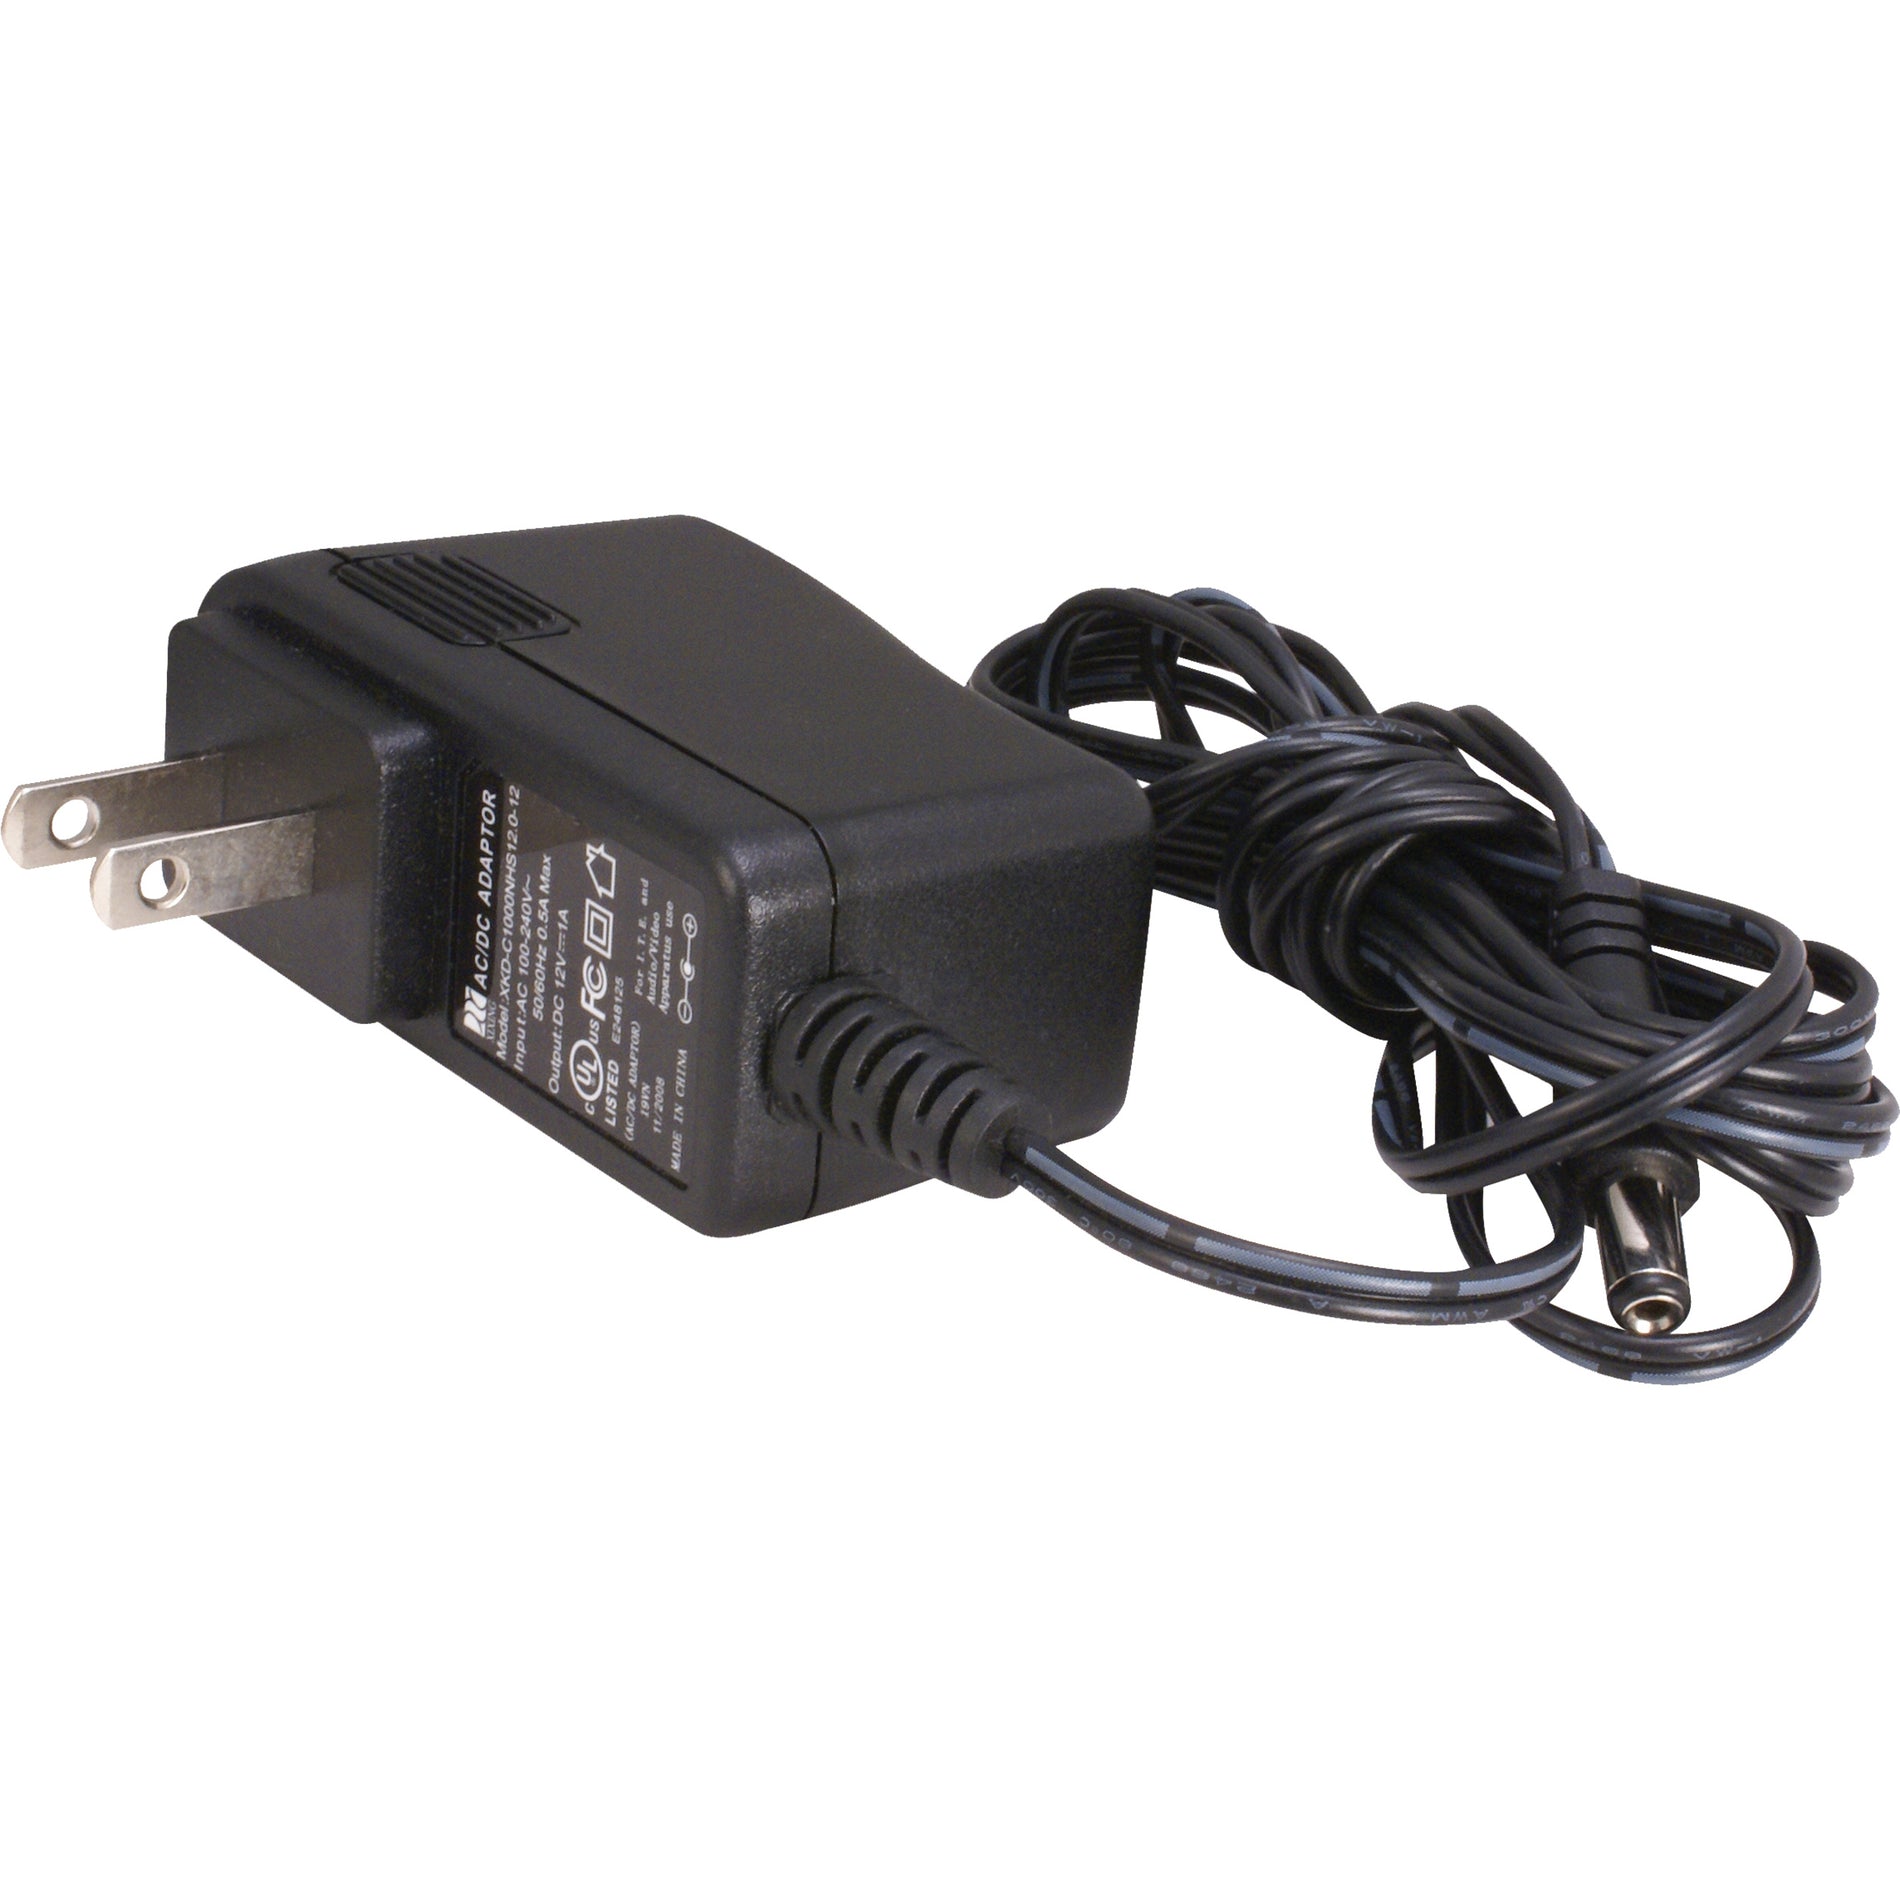 Speco PSW-5 AC Adapter, 12V DC Regulated Power Supply, 500mA Output